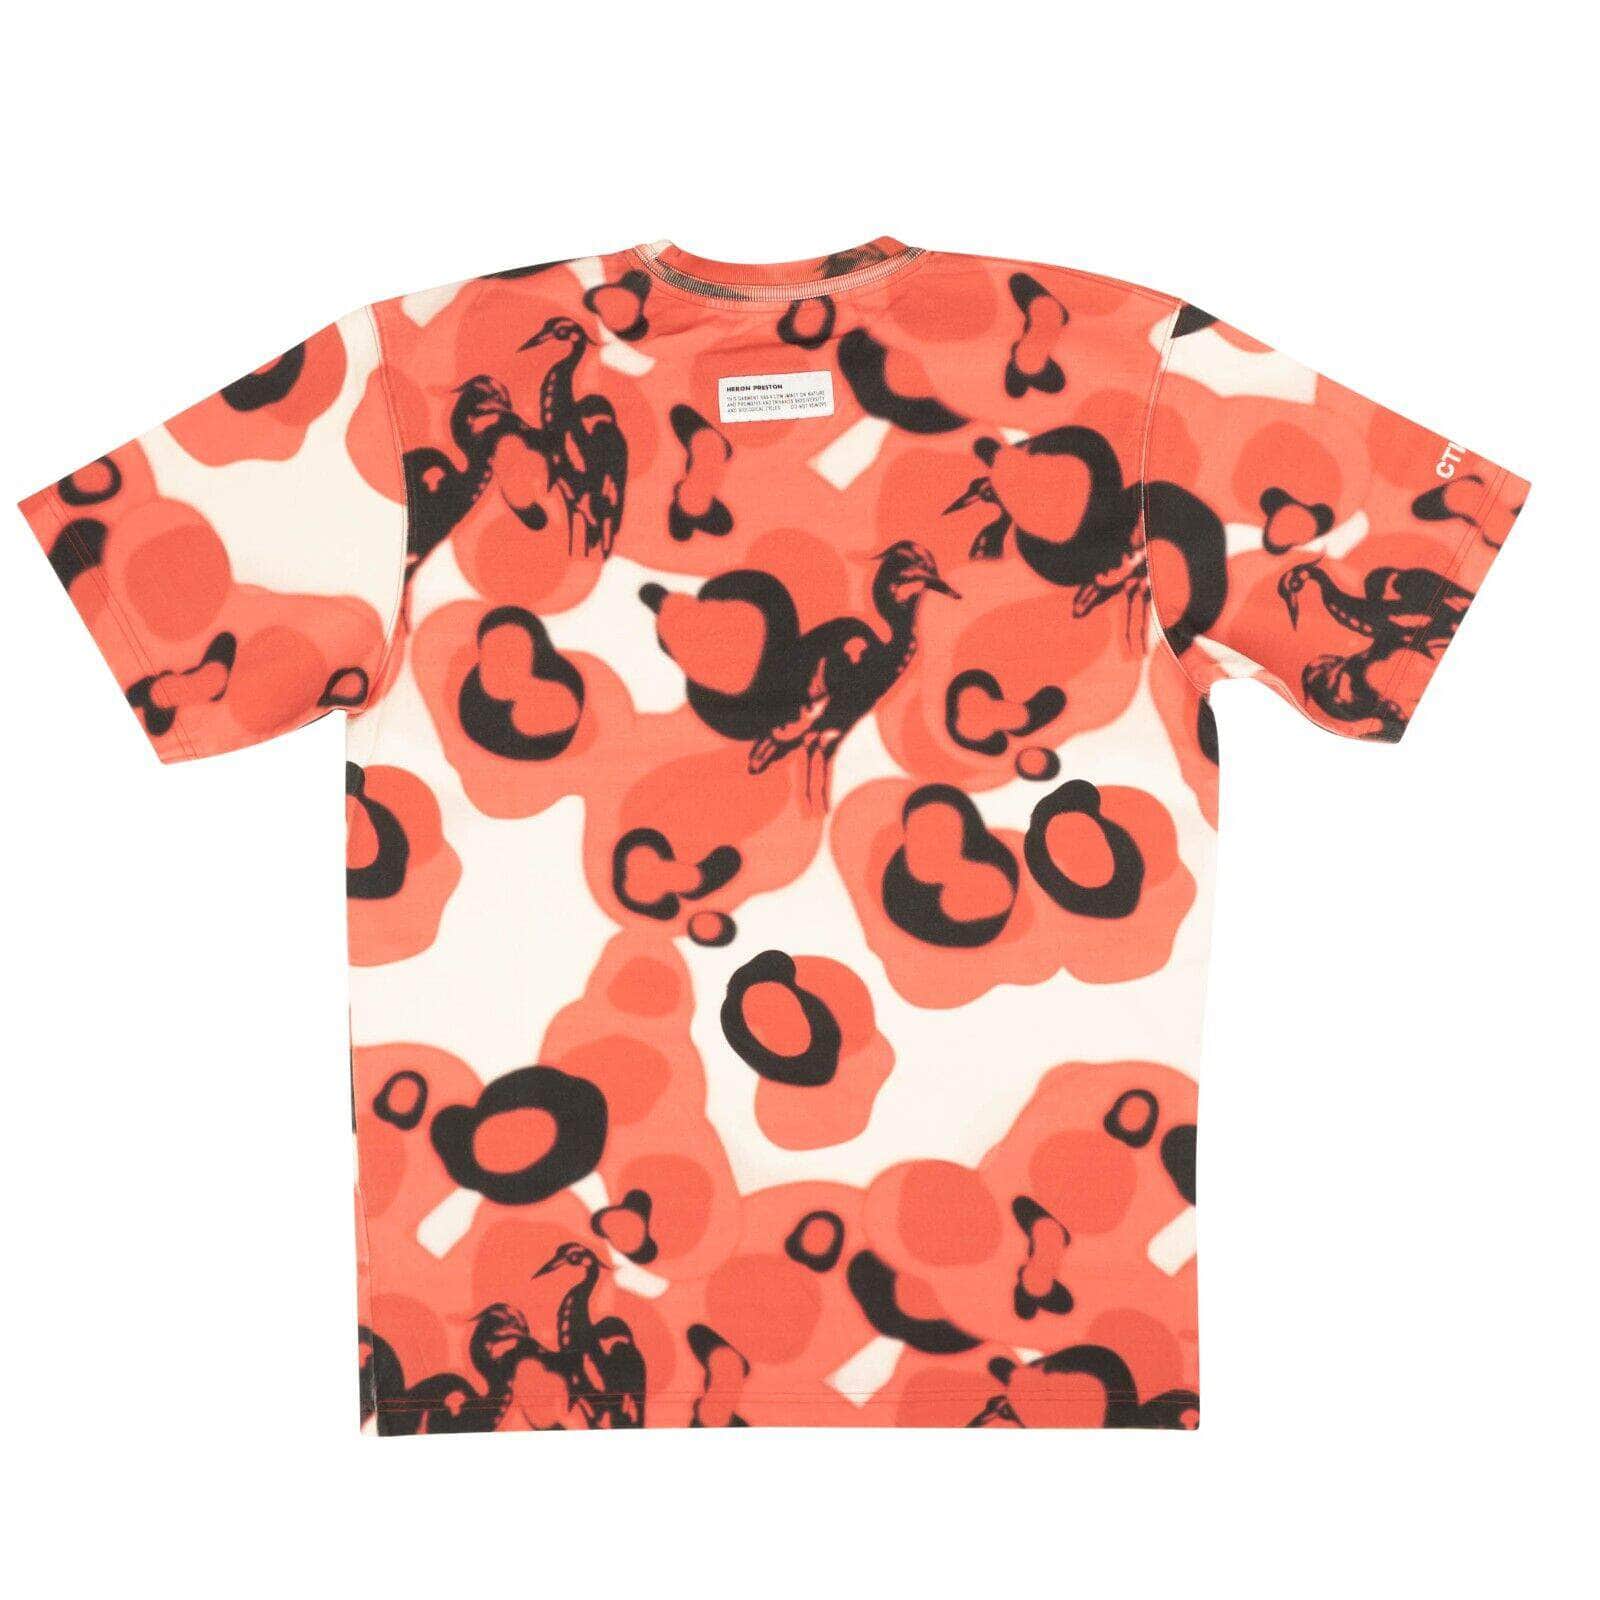 Heron Preston 250-500, channelenable-all, chicmi, couponcollection, gender-mens, heron-preston, main-clothing, mens-shoes, size-m, size-s S Red Washed Camo Short Sleeve T-Shirt 95-HRP-1007/S 95-HRP-1007/S